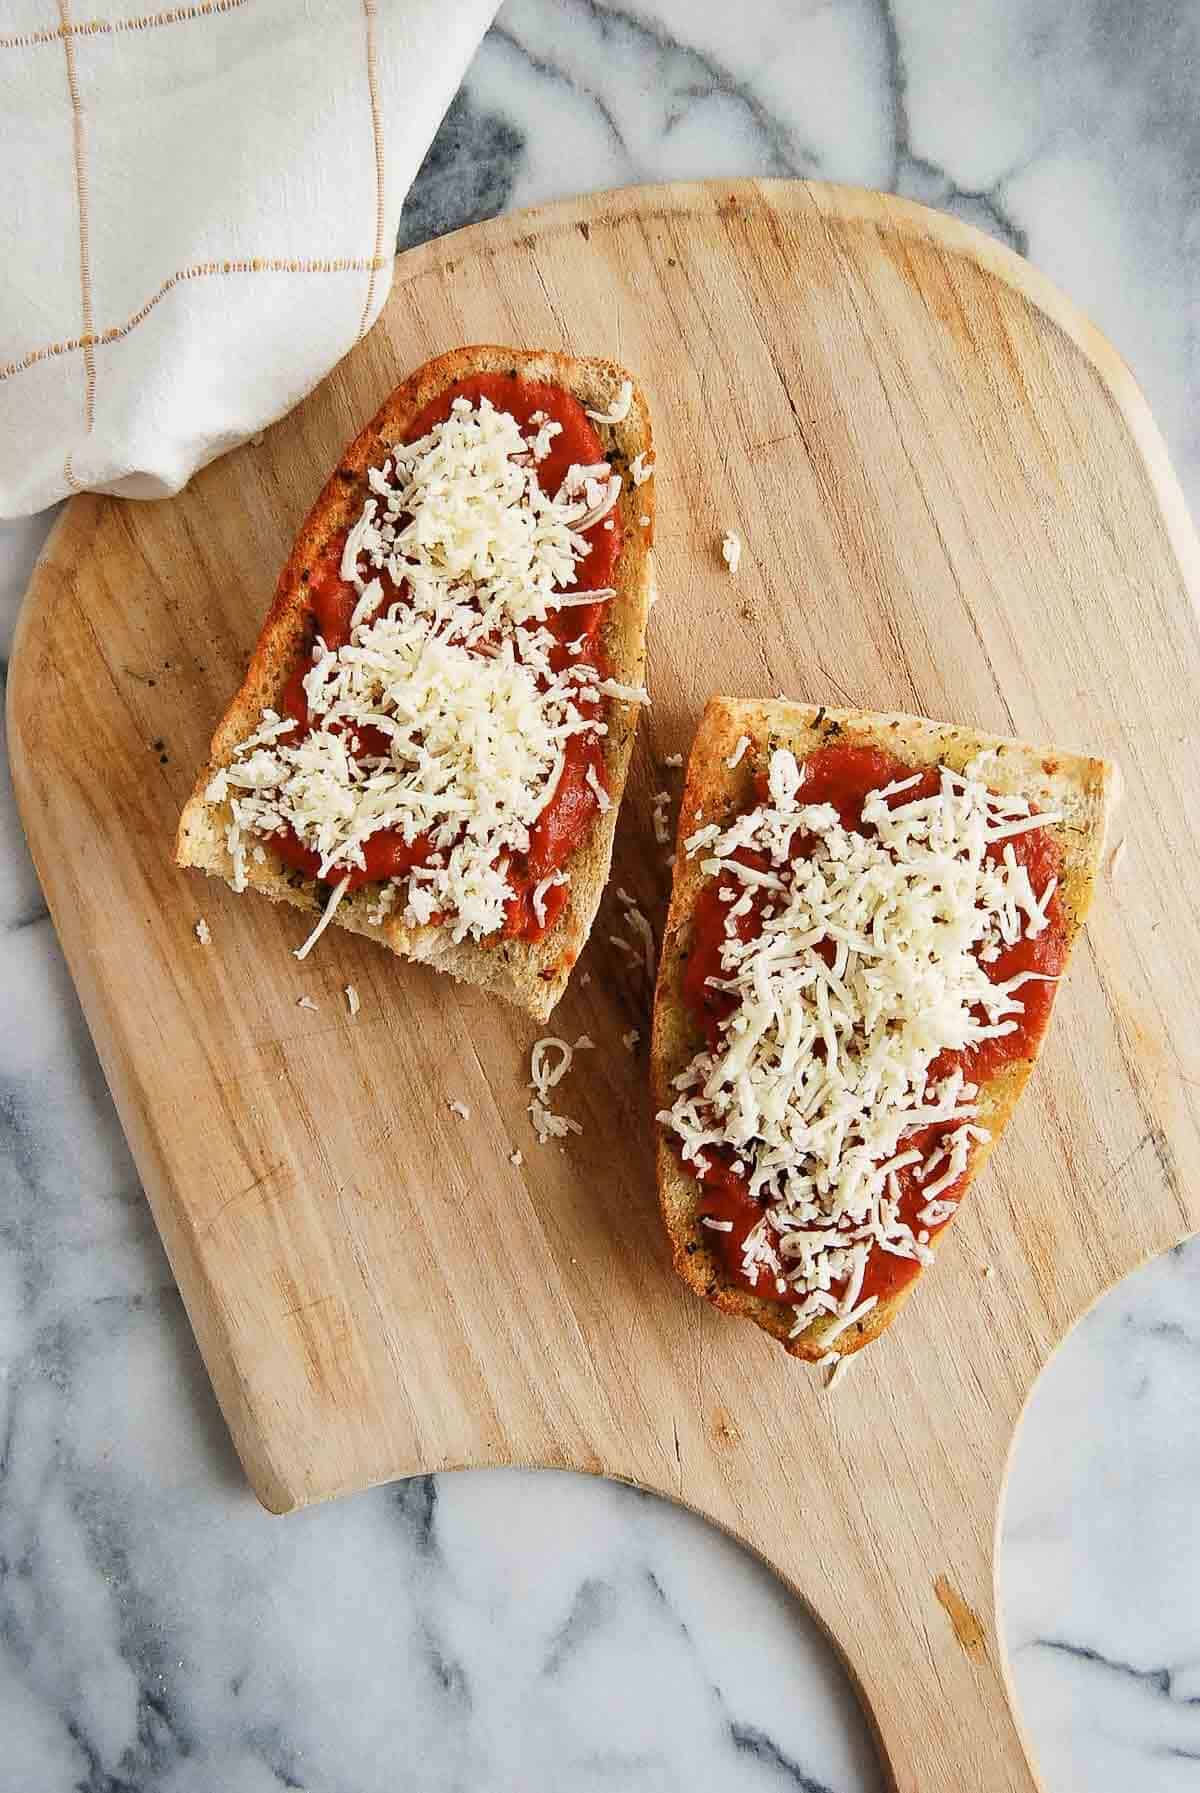 Toasted french bread pieces with pizza sauce and mozzarella cheese on the top.